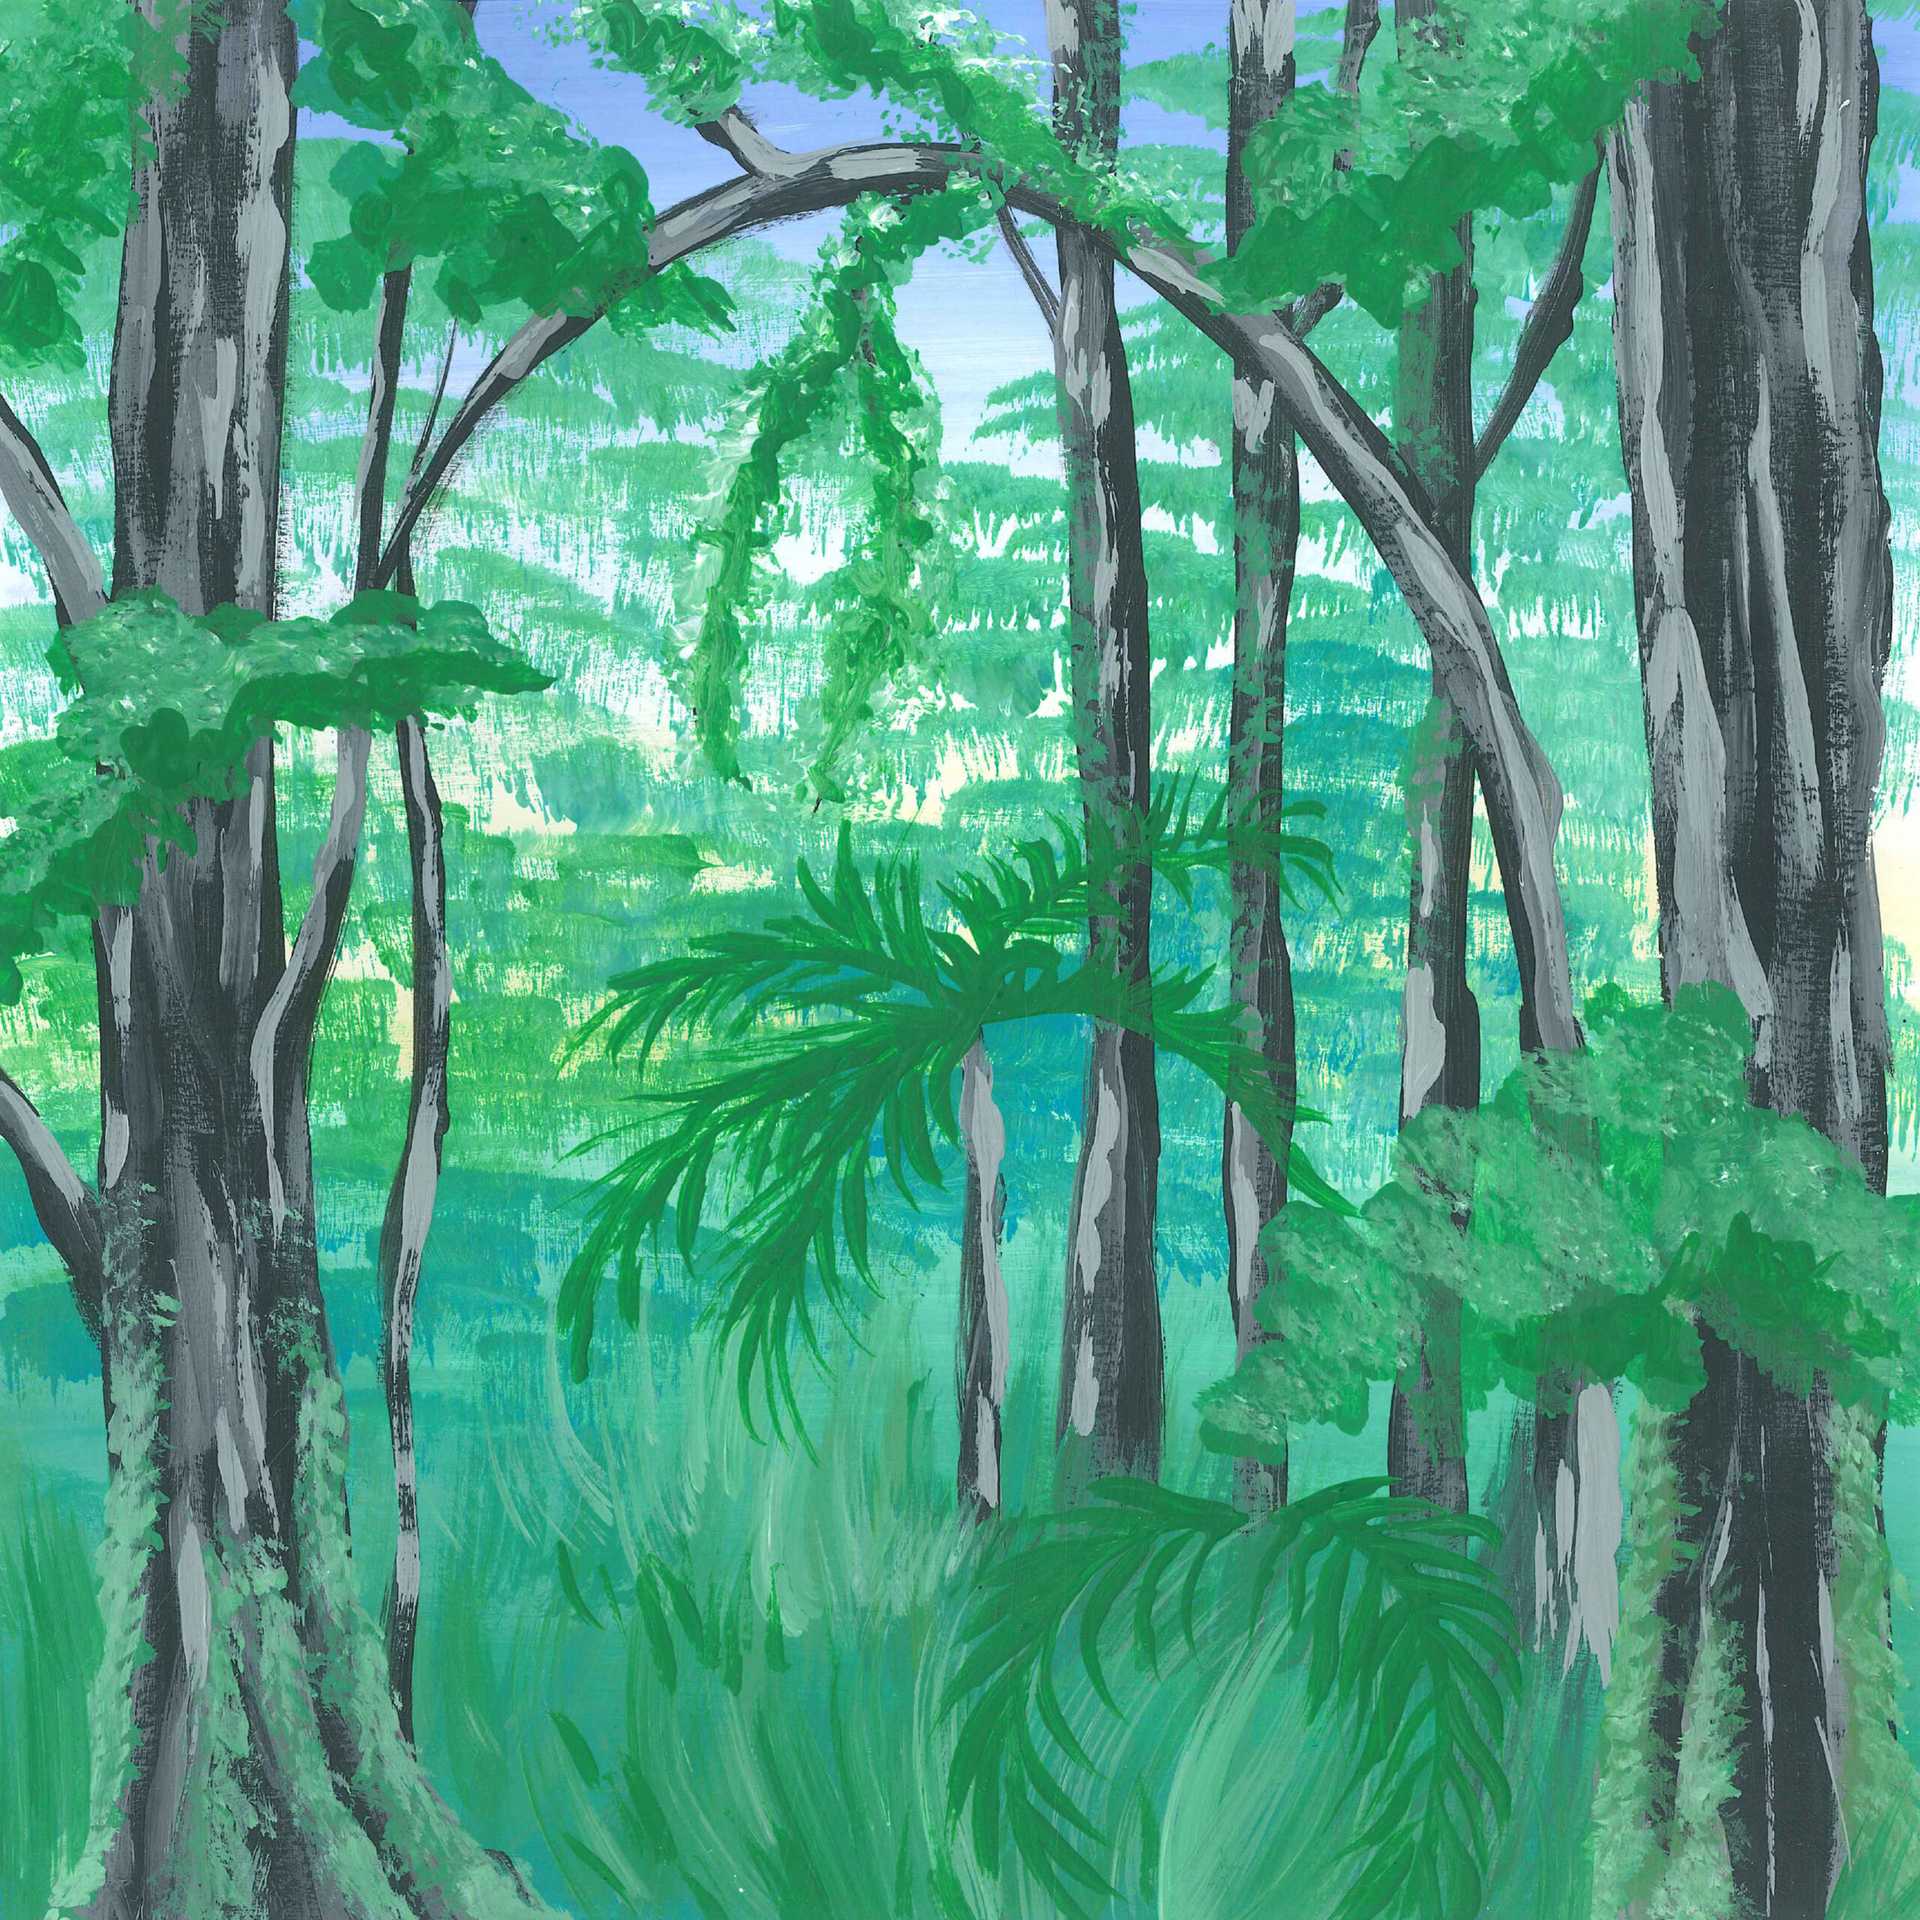 Summer Afternoon in the Atlantic Forest - nature landscape painting - earth.fm